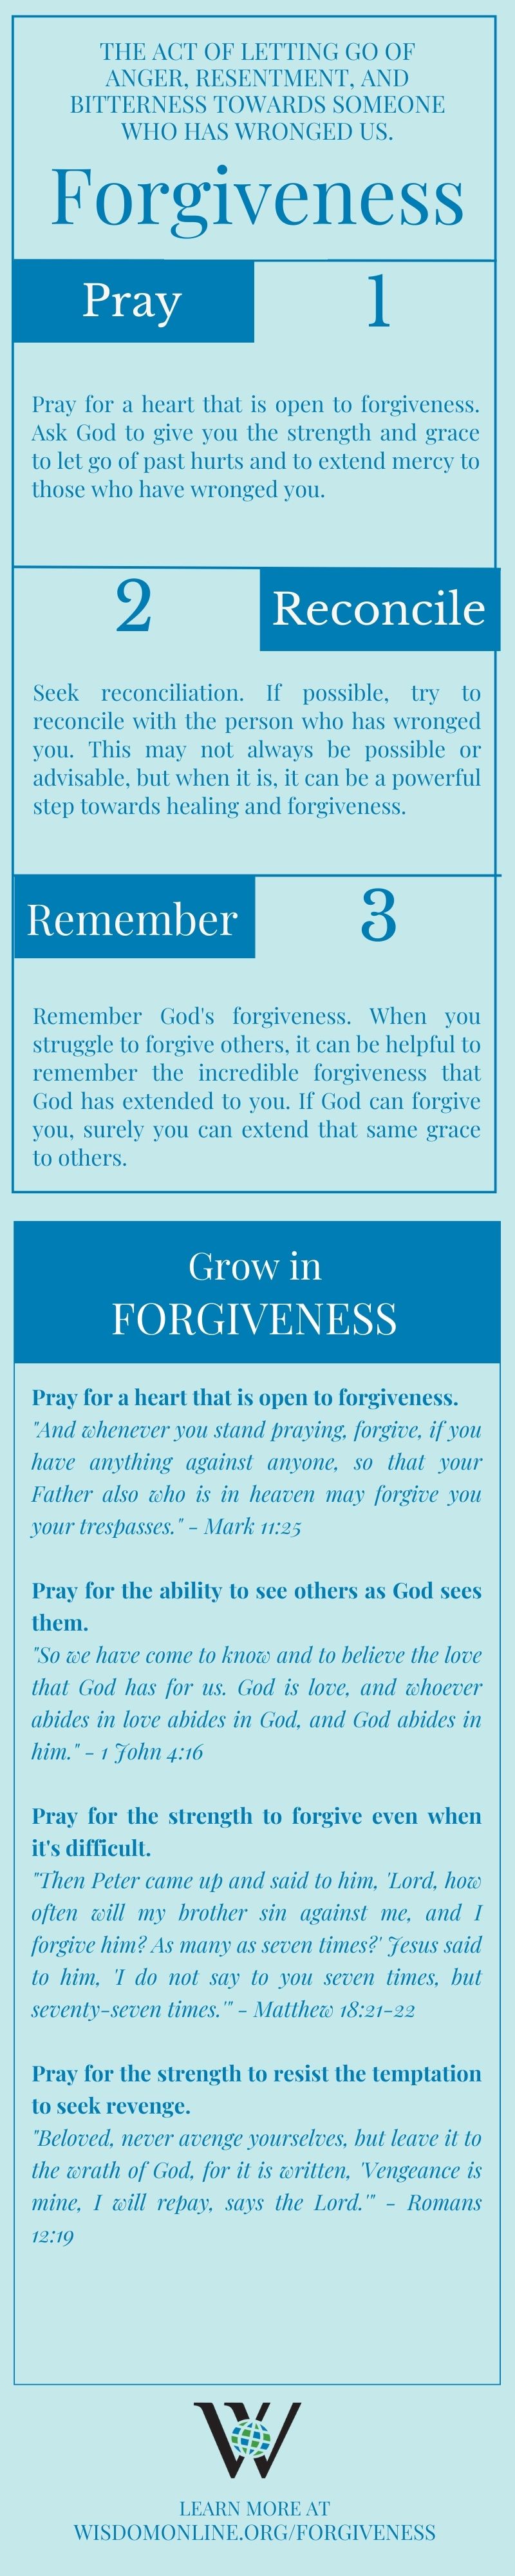 Infographic on Biblical Forgiveness